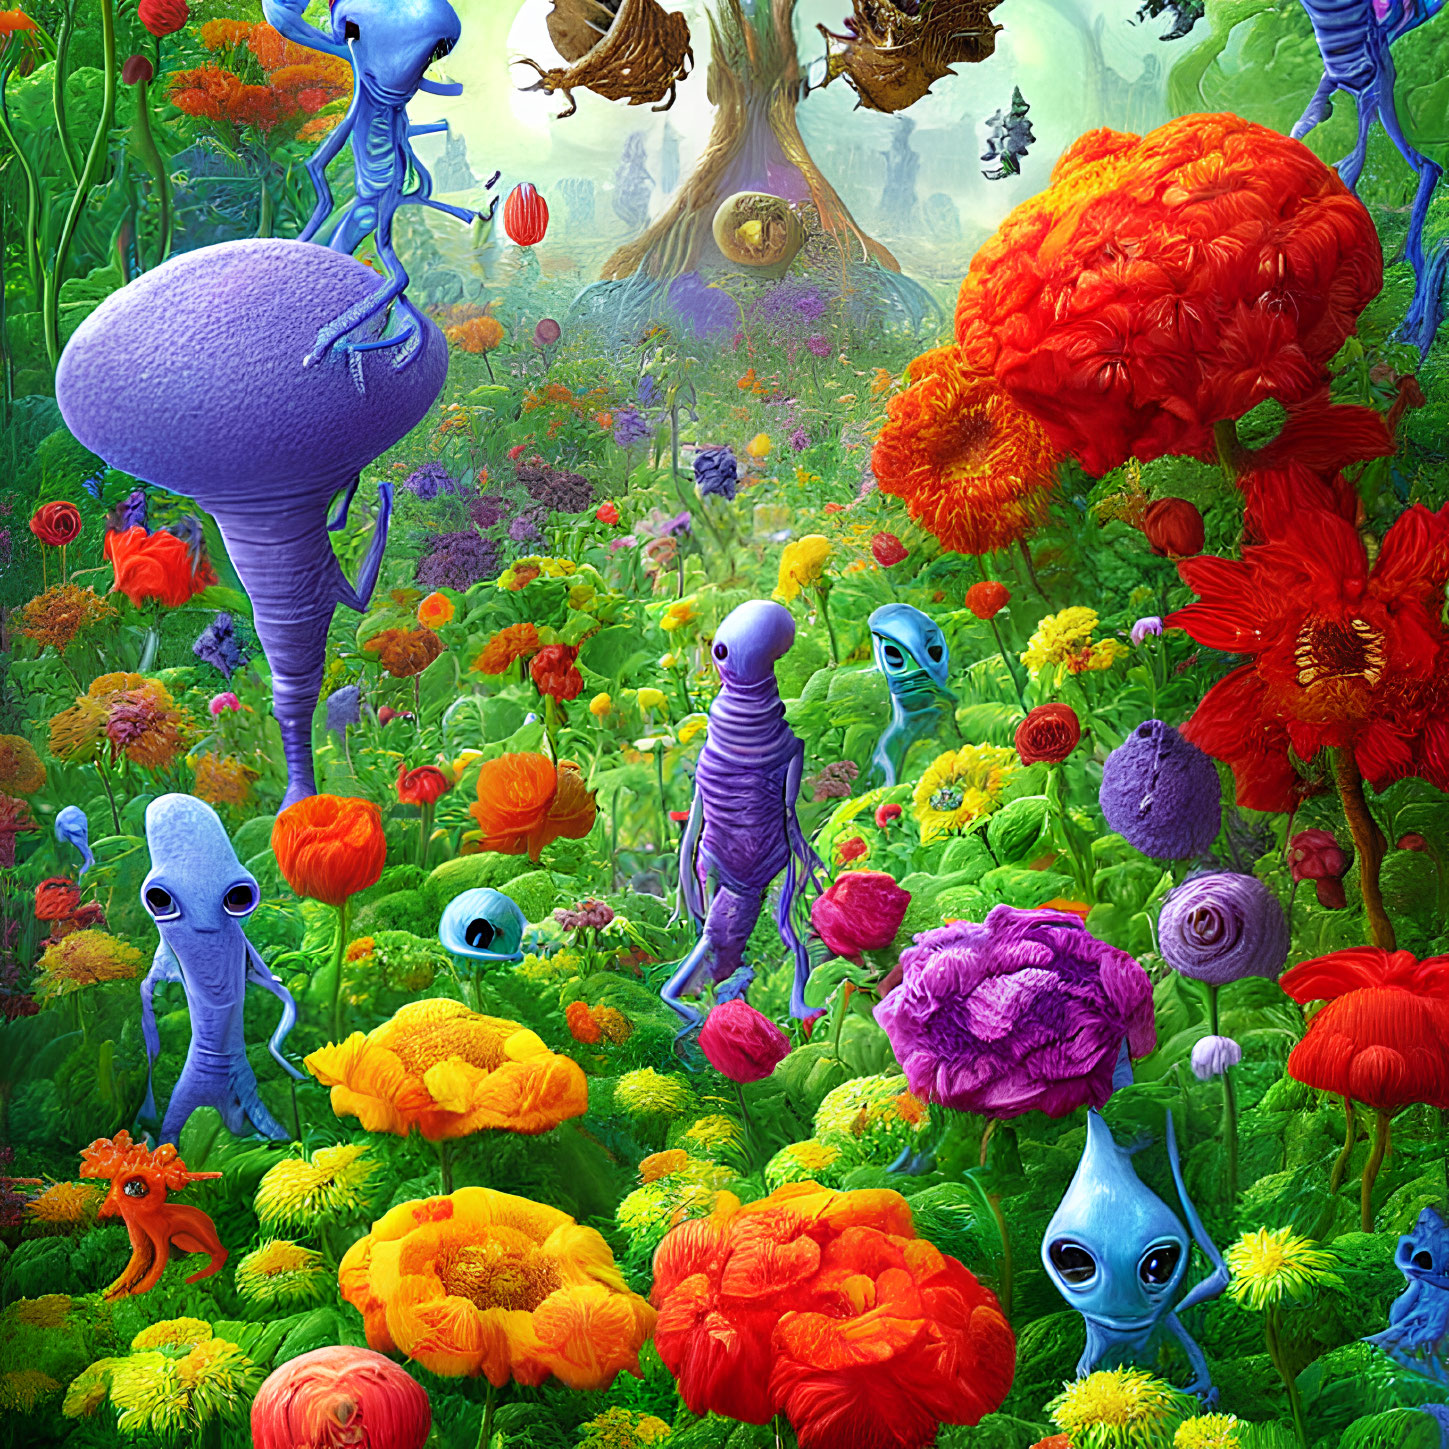 Colorful Alien Landscape with Whimsical Flora and Extraterrestrial Creatures